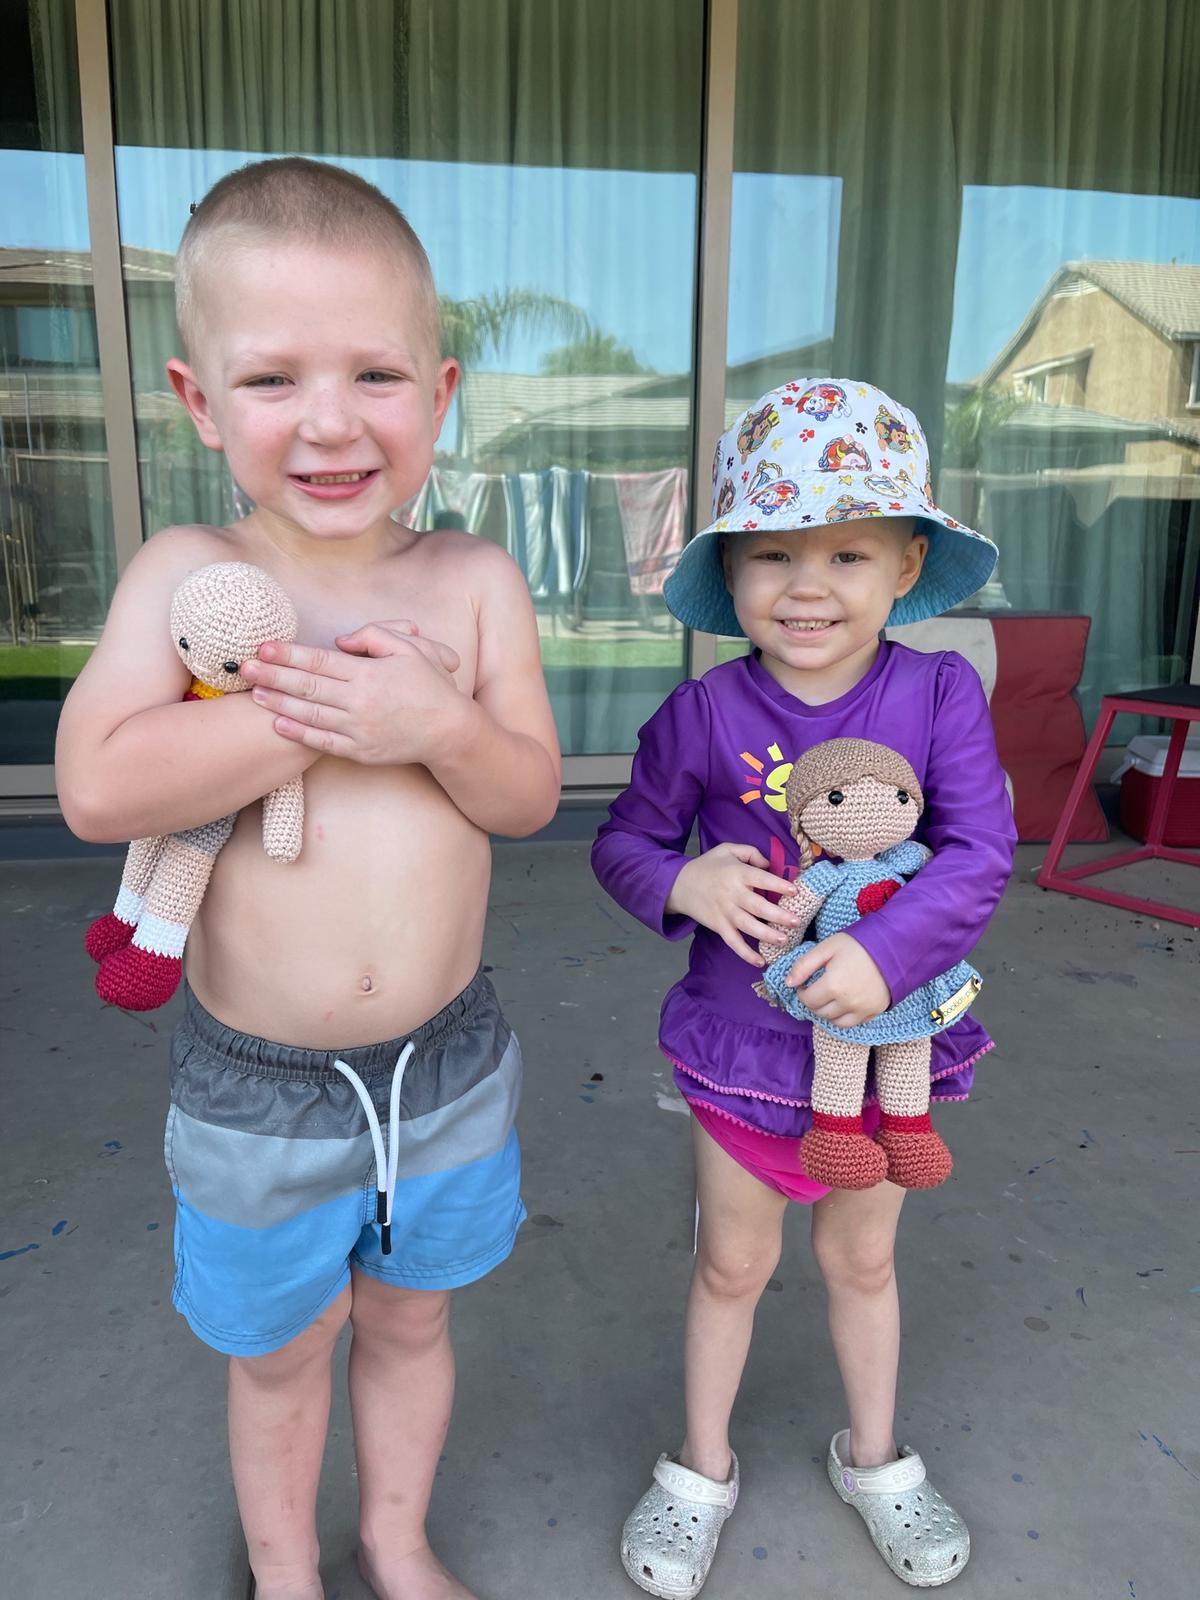 Mack Porter and Payson Altice were both battling cancer when they first met. (Courtesy of <a href="https://www.instagram.com/macky.strong/">Danielle Porter</a>)